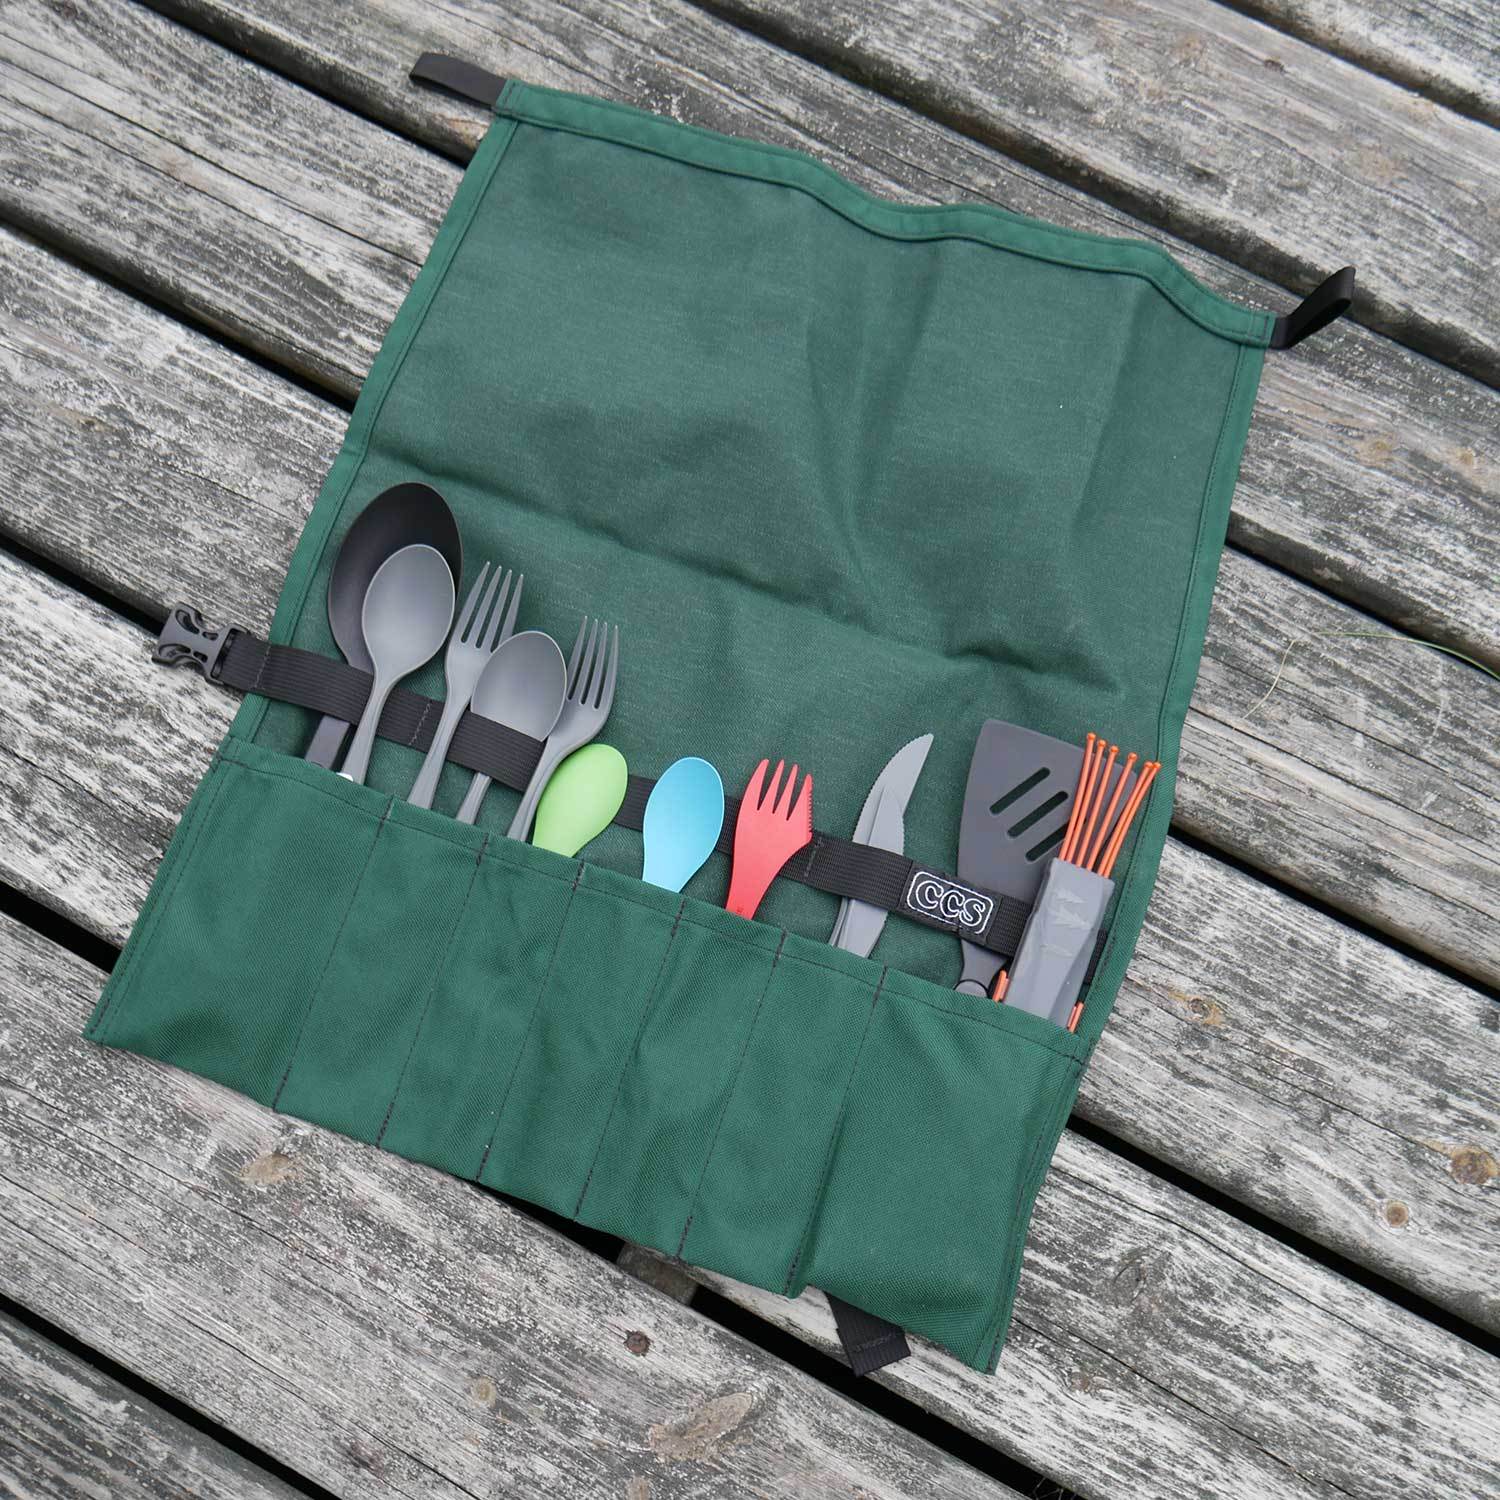 Utensil Roll Up By Ccs, Camp Kitchen Organizer